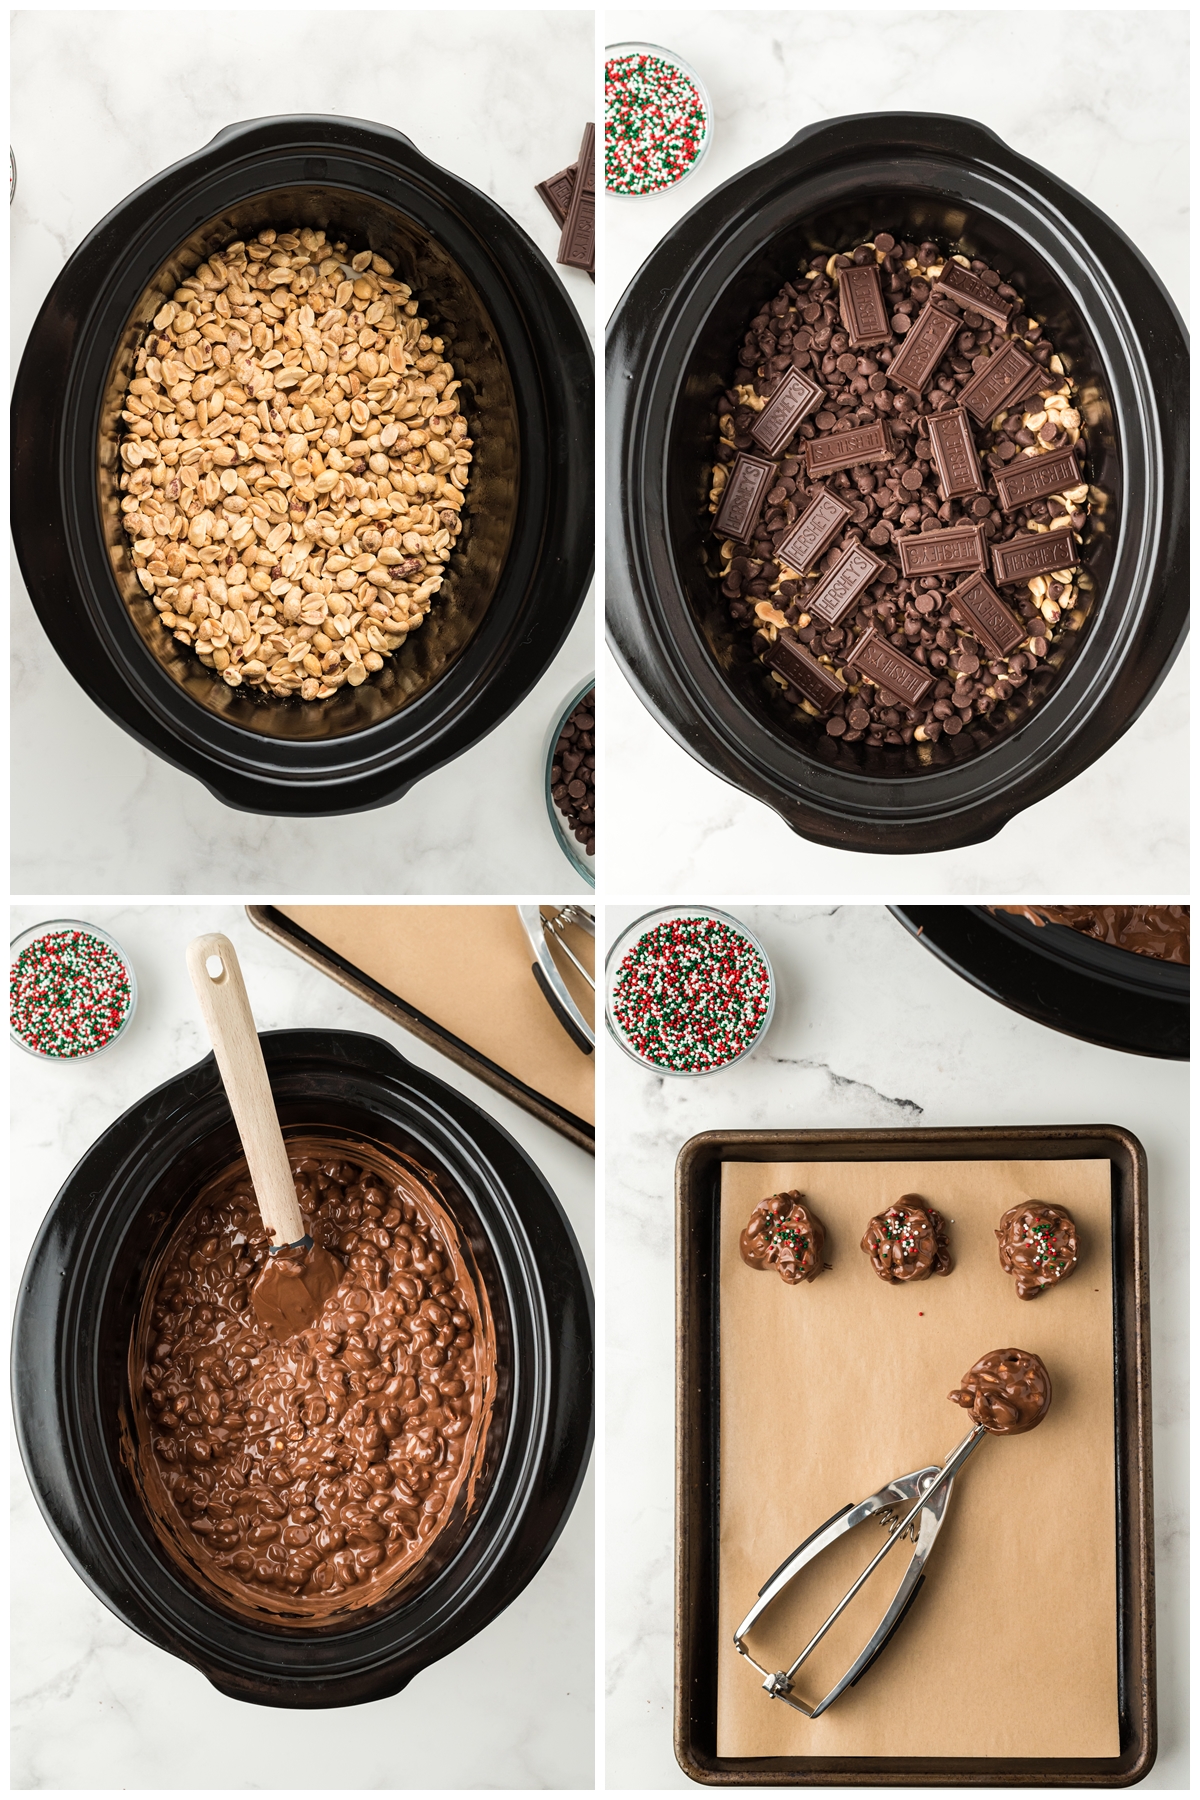 The process of preparing Crockpot Christmas Crack starting off with adding salty peanuts, white and milk chocolate and melting them. Then scooping into bite sizes